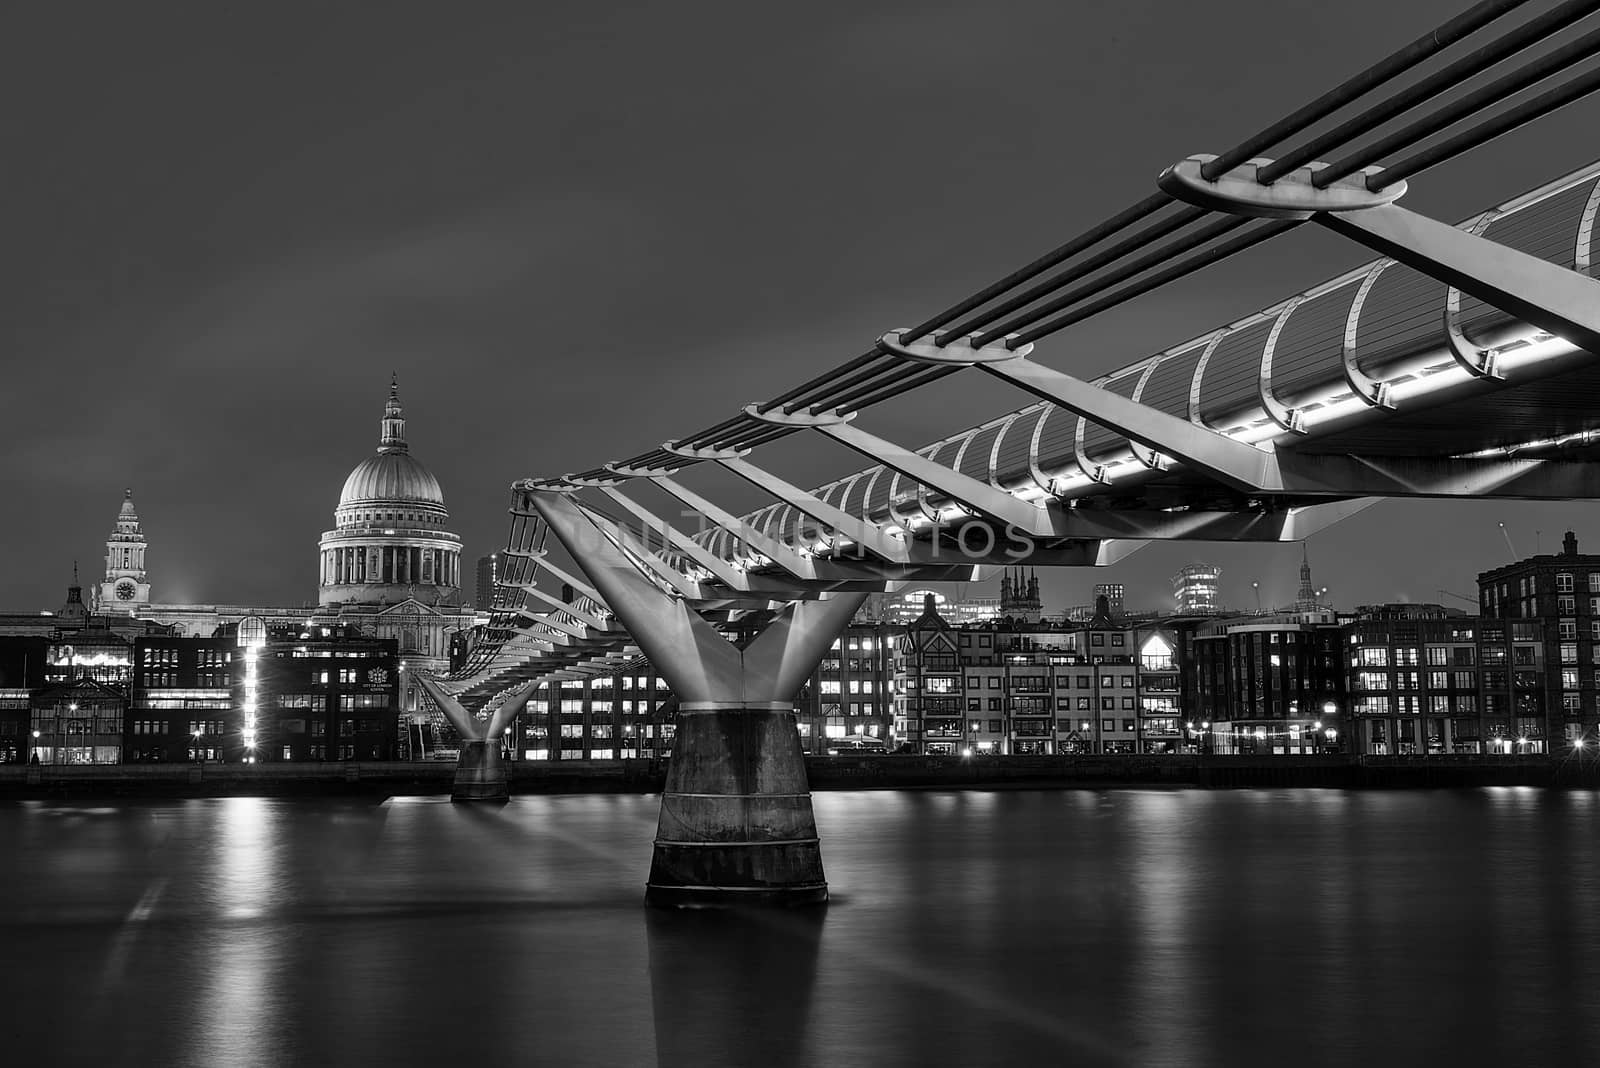 London, UK - Jan 2020: St Paul's Cathedral along the length of Millennium Bridge, Black and White